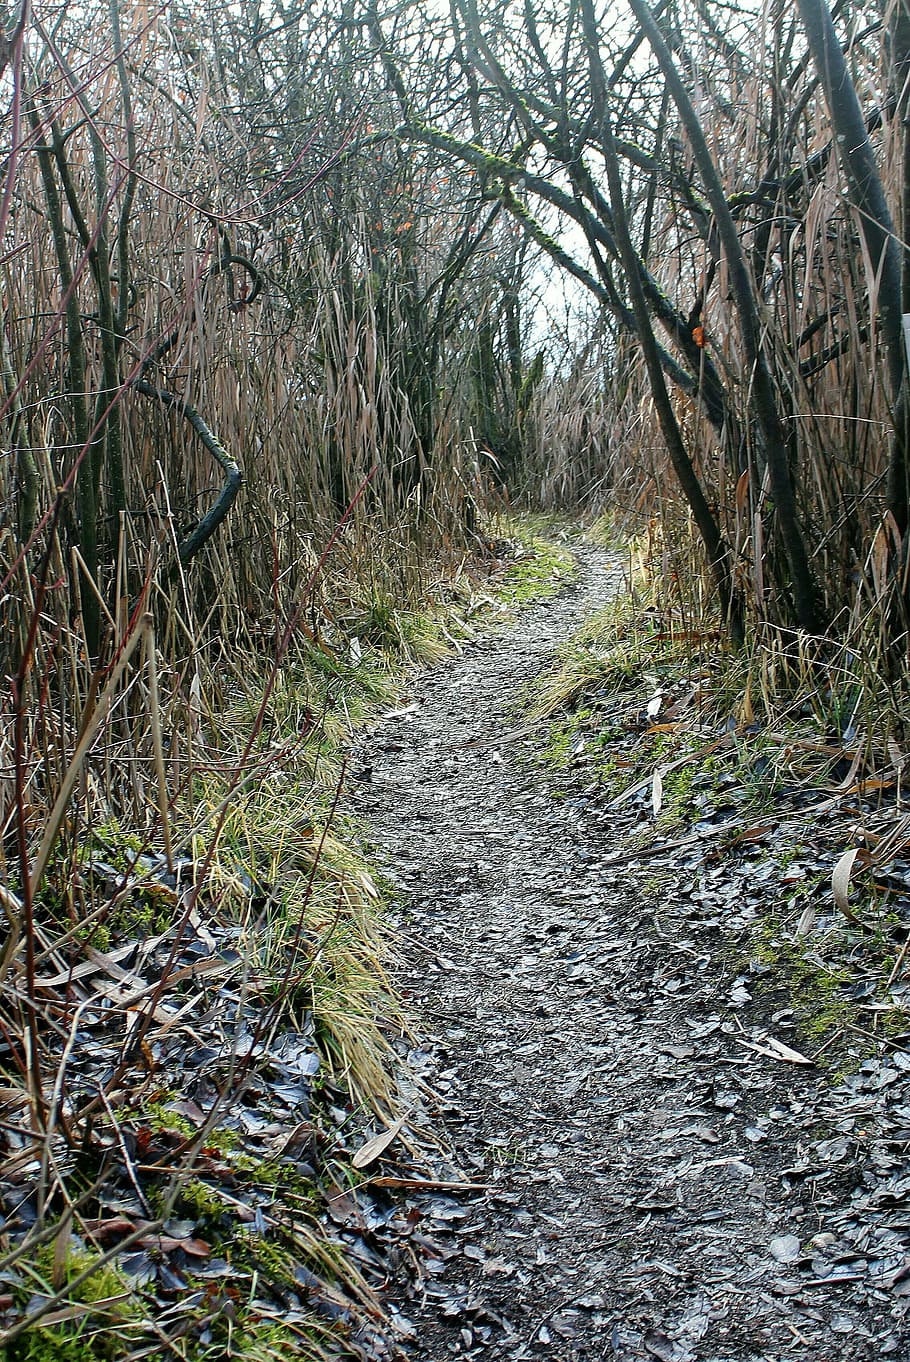 trail, away, path, walk, water, reed, thicket, reeds, scrub, bushes